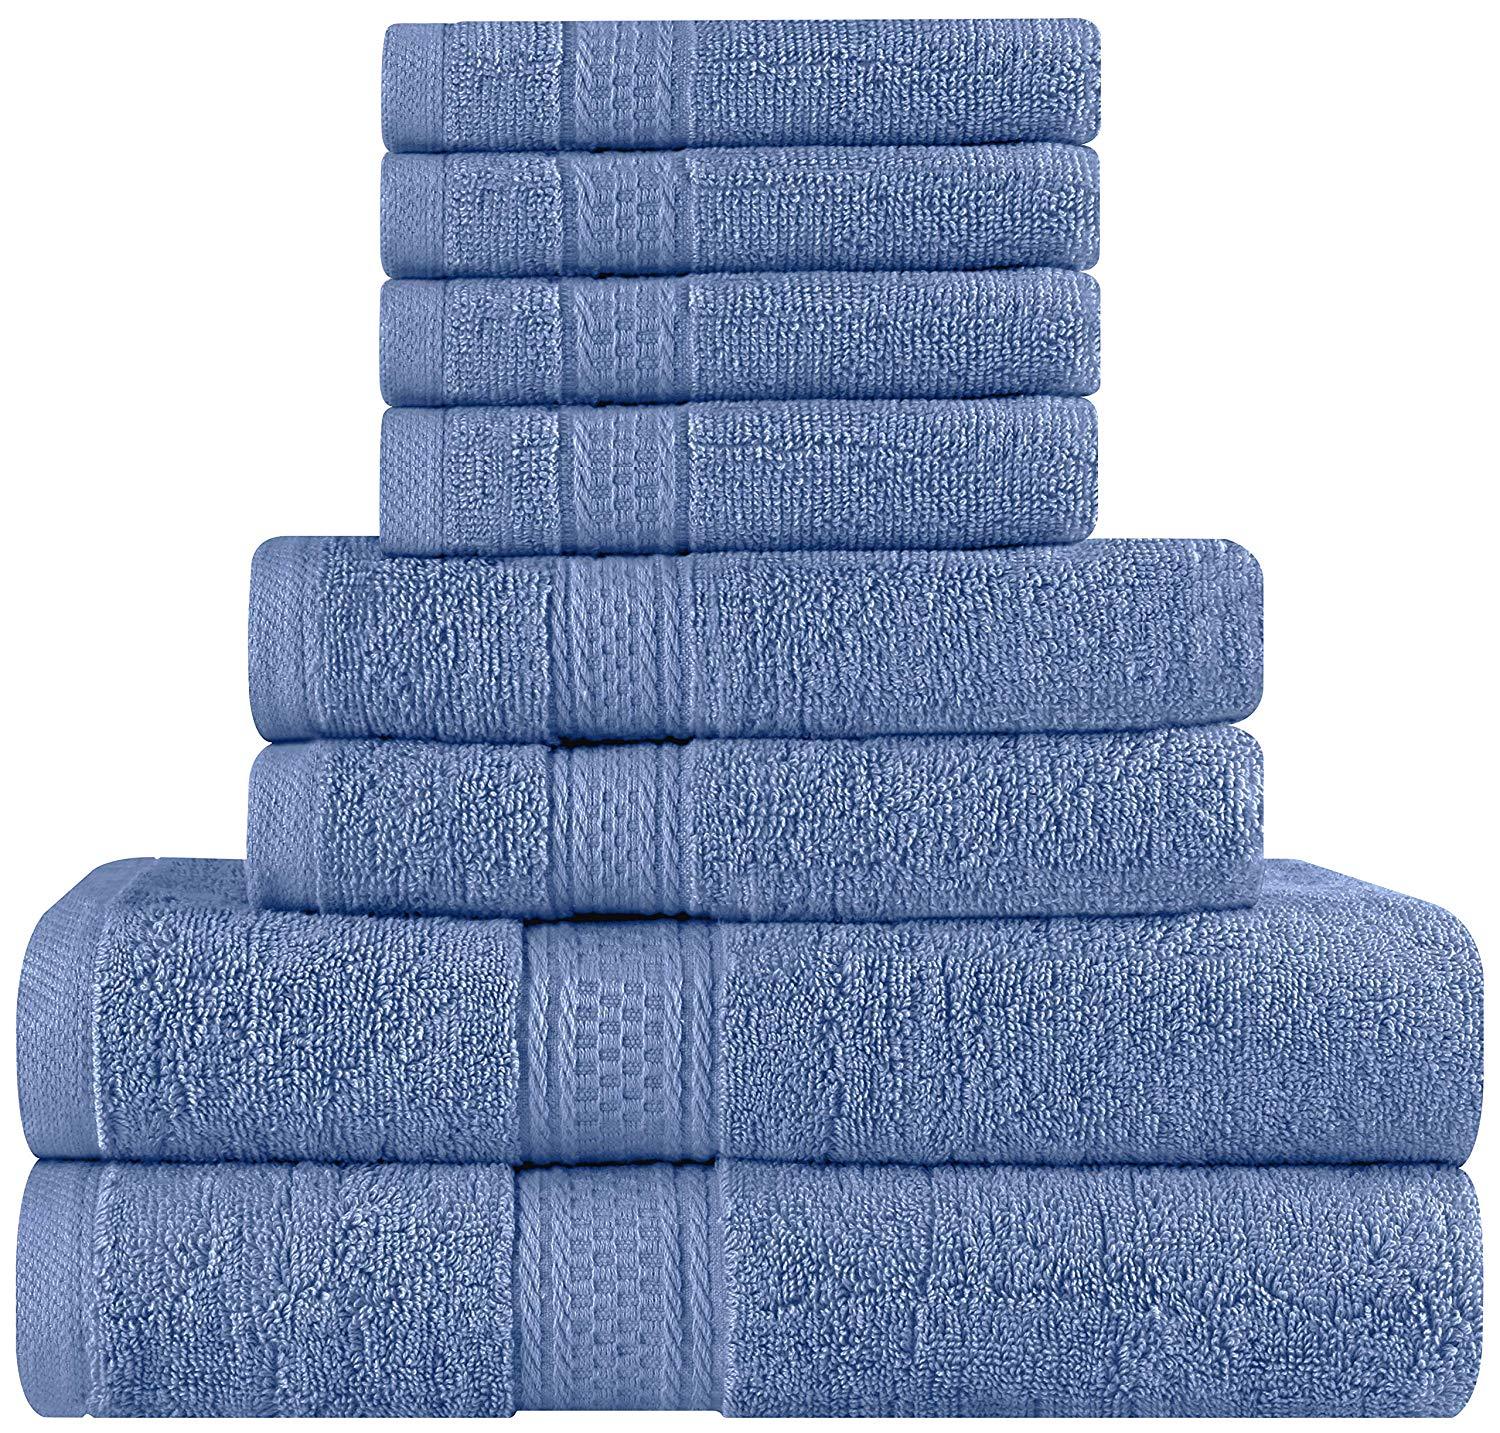 Utopia Towels 8-Piece Premium Towel Set, 2 Bath Towels, 2 Hand Towels, and  4 Wash Cloths, 100% Ring Spun Cotton Highly Absorbent Towels for Bathroom